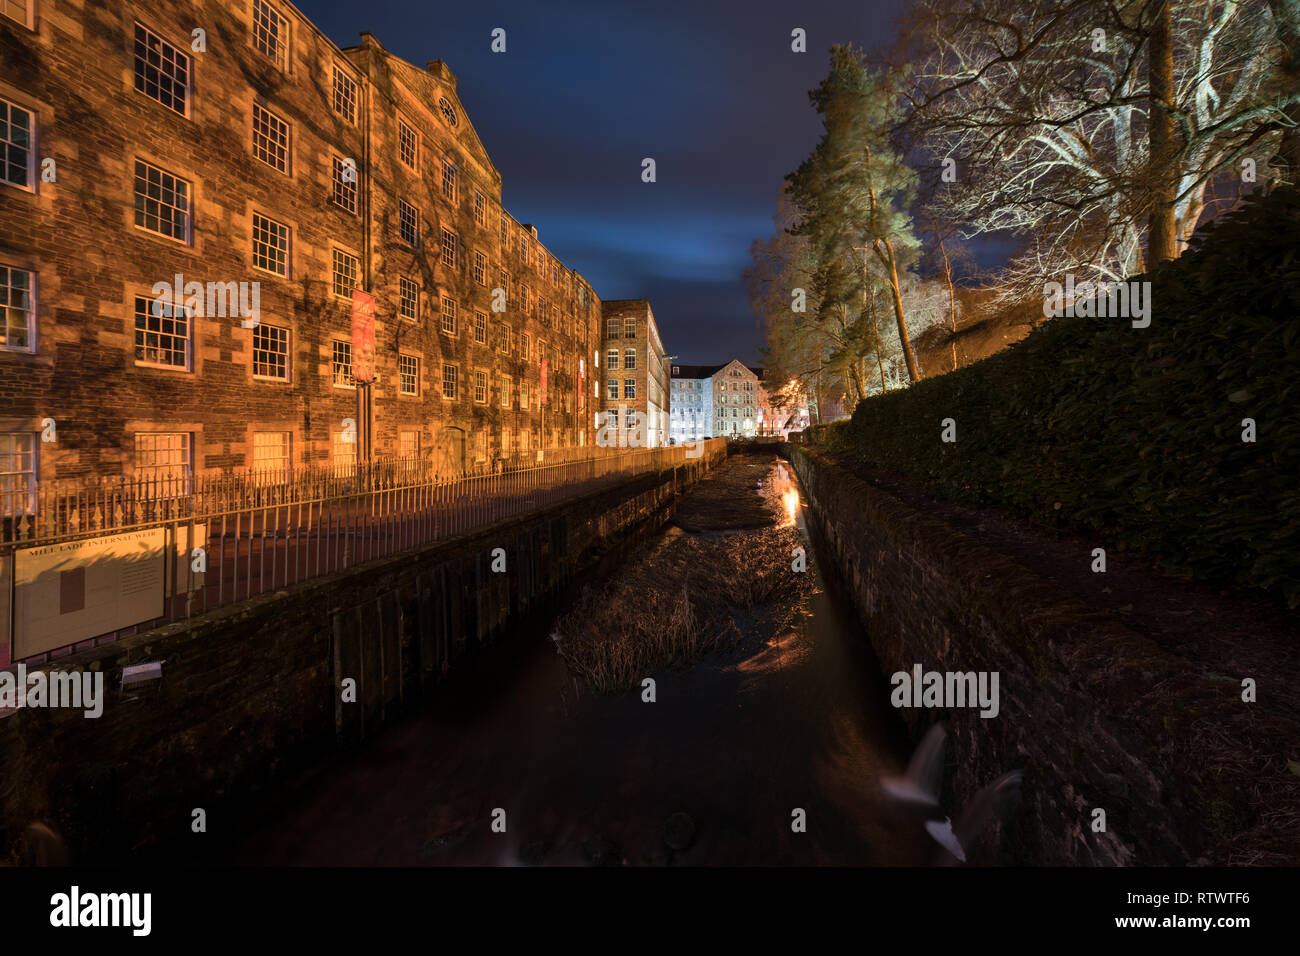 New Lanark World Heritage Site seen at night showing buildings illuminated and lights showing in windows. Stock Photo